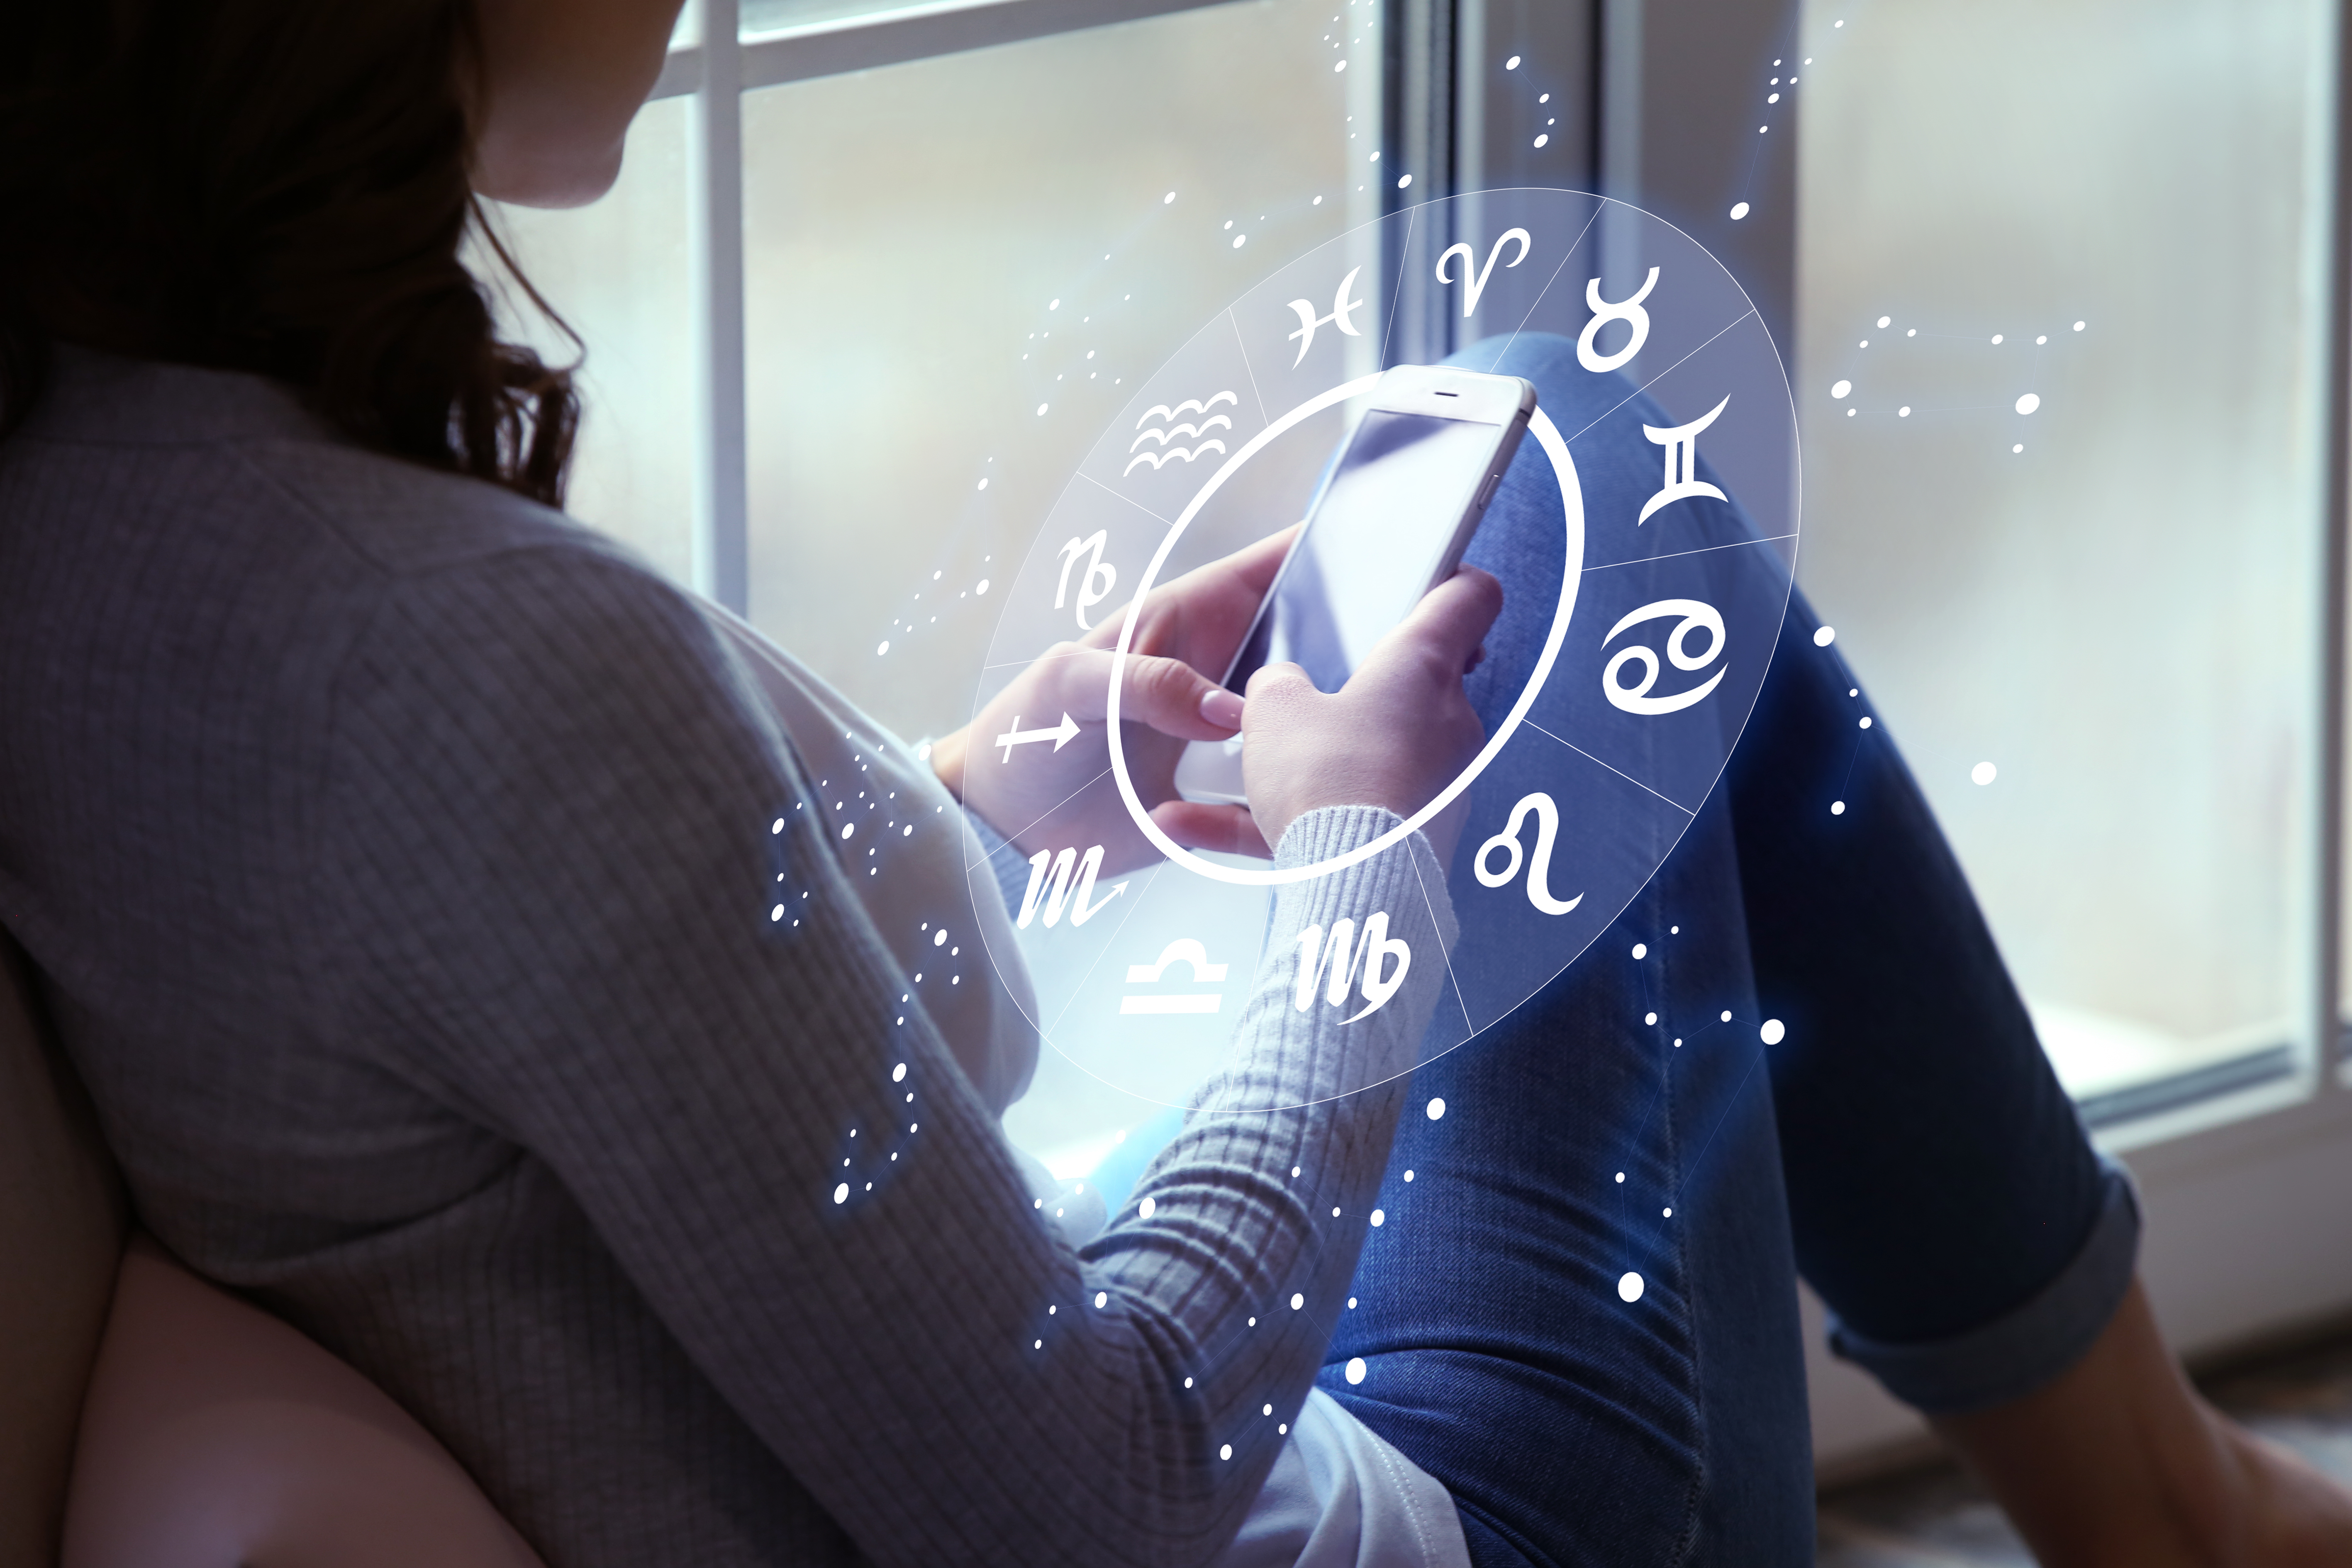 A woman sat next to a window looking at her phone screen with a zodiac wheel around the phone